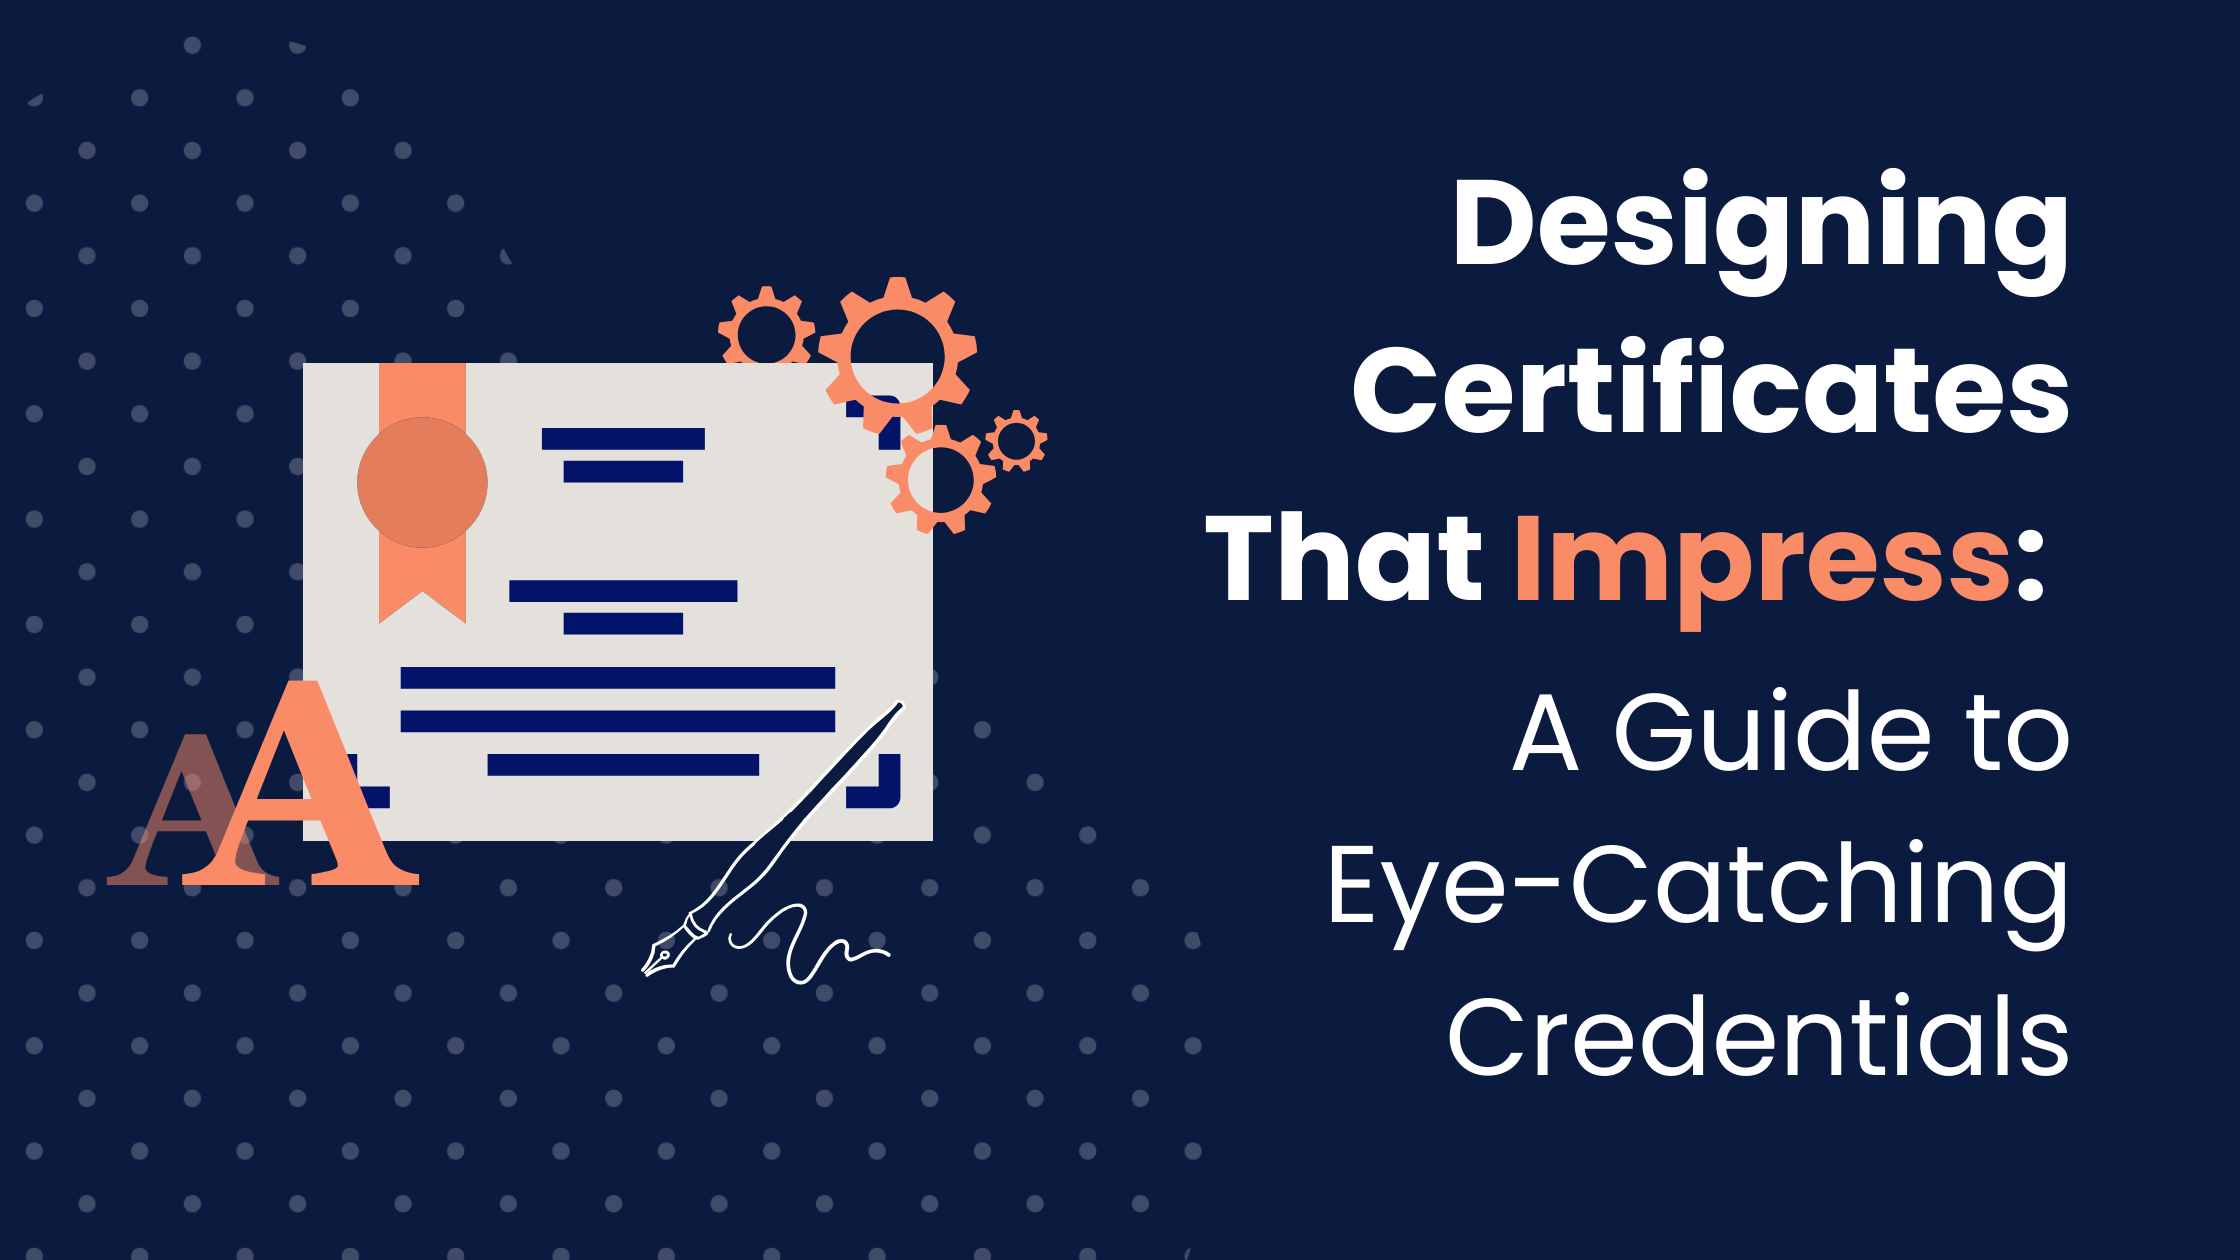 Designing Certificates That Impress: A Guide to Eye-Catching Credentials